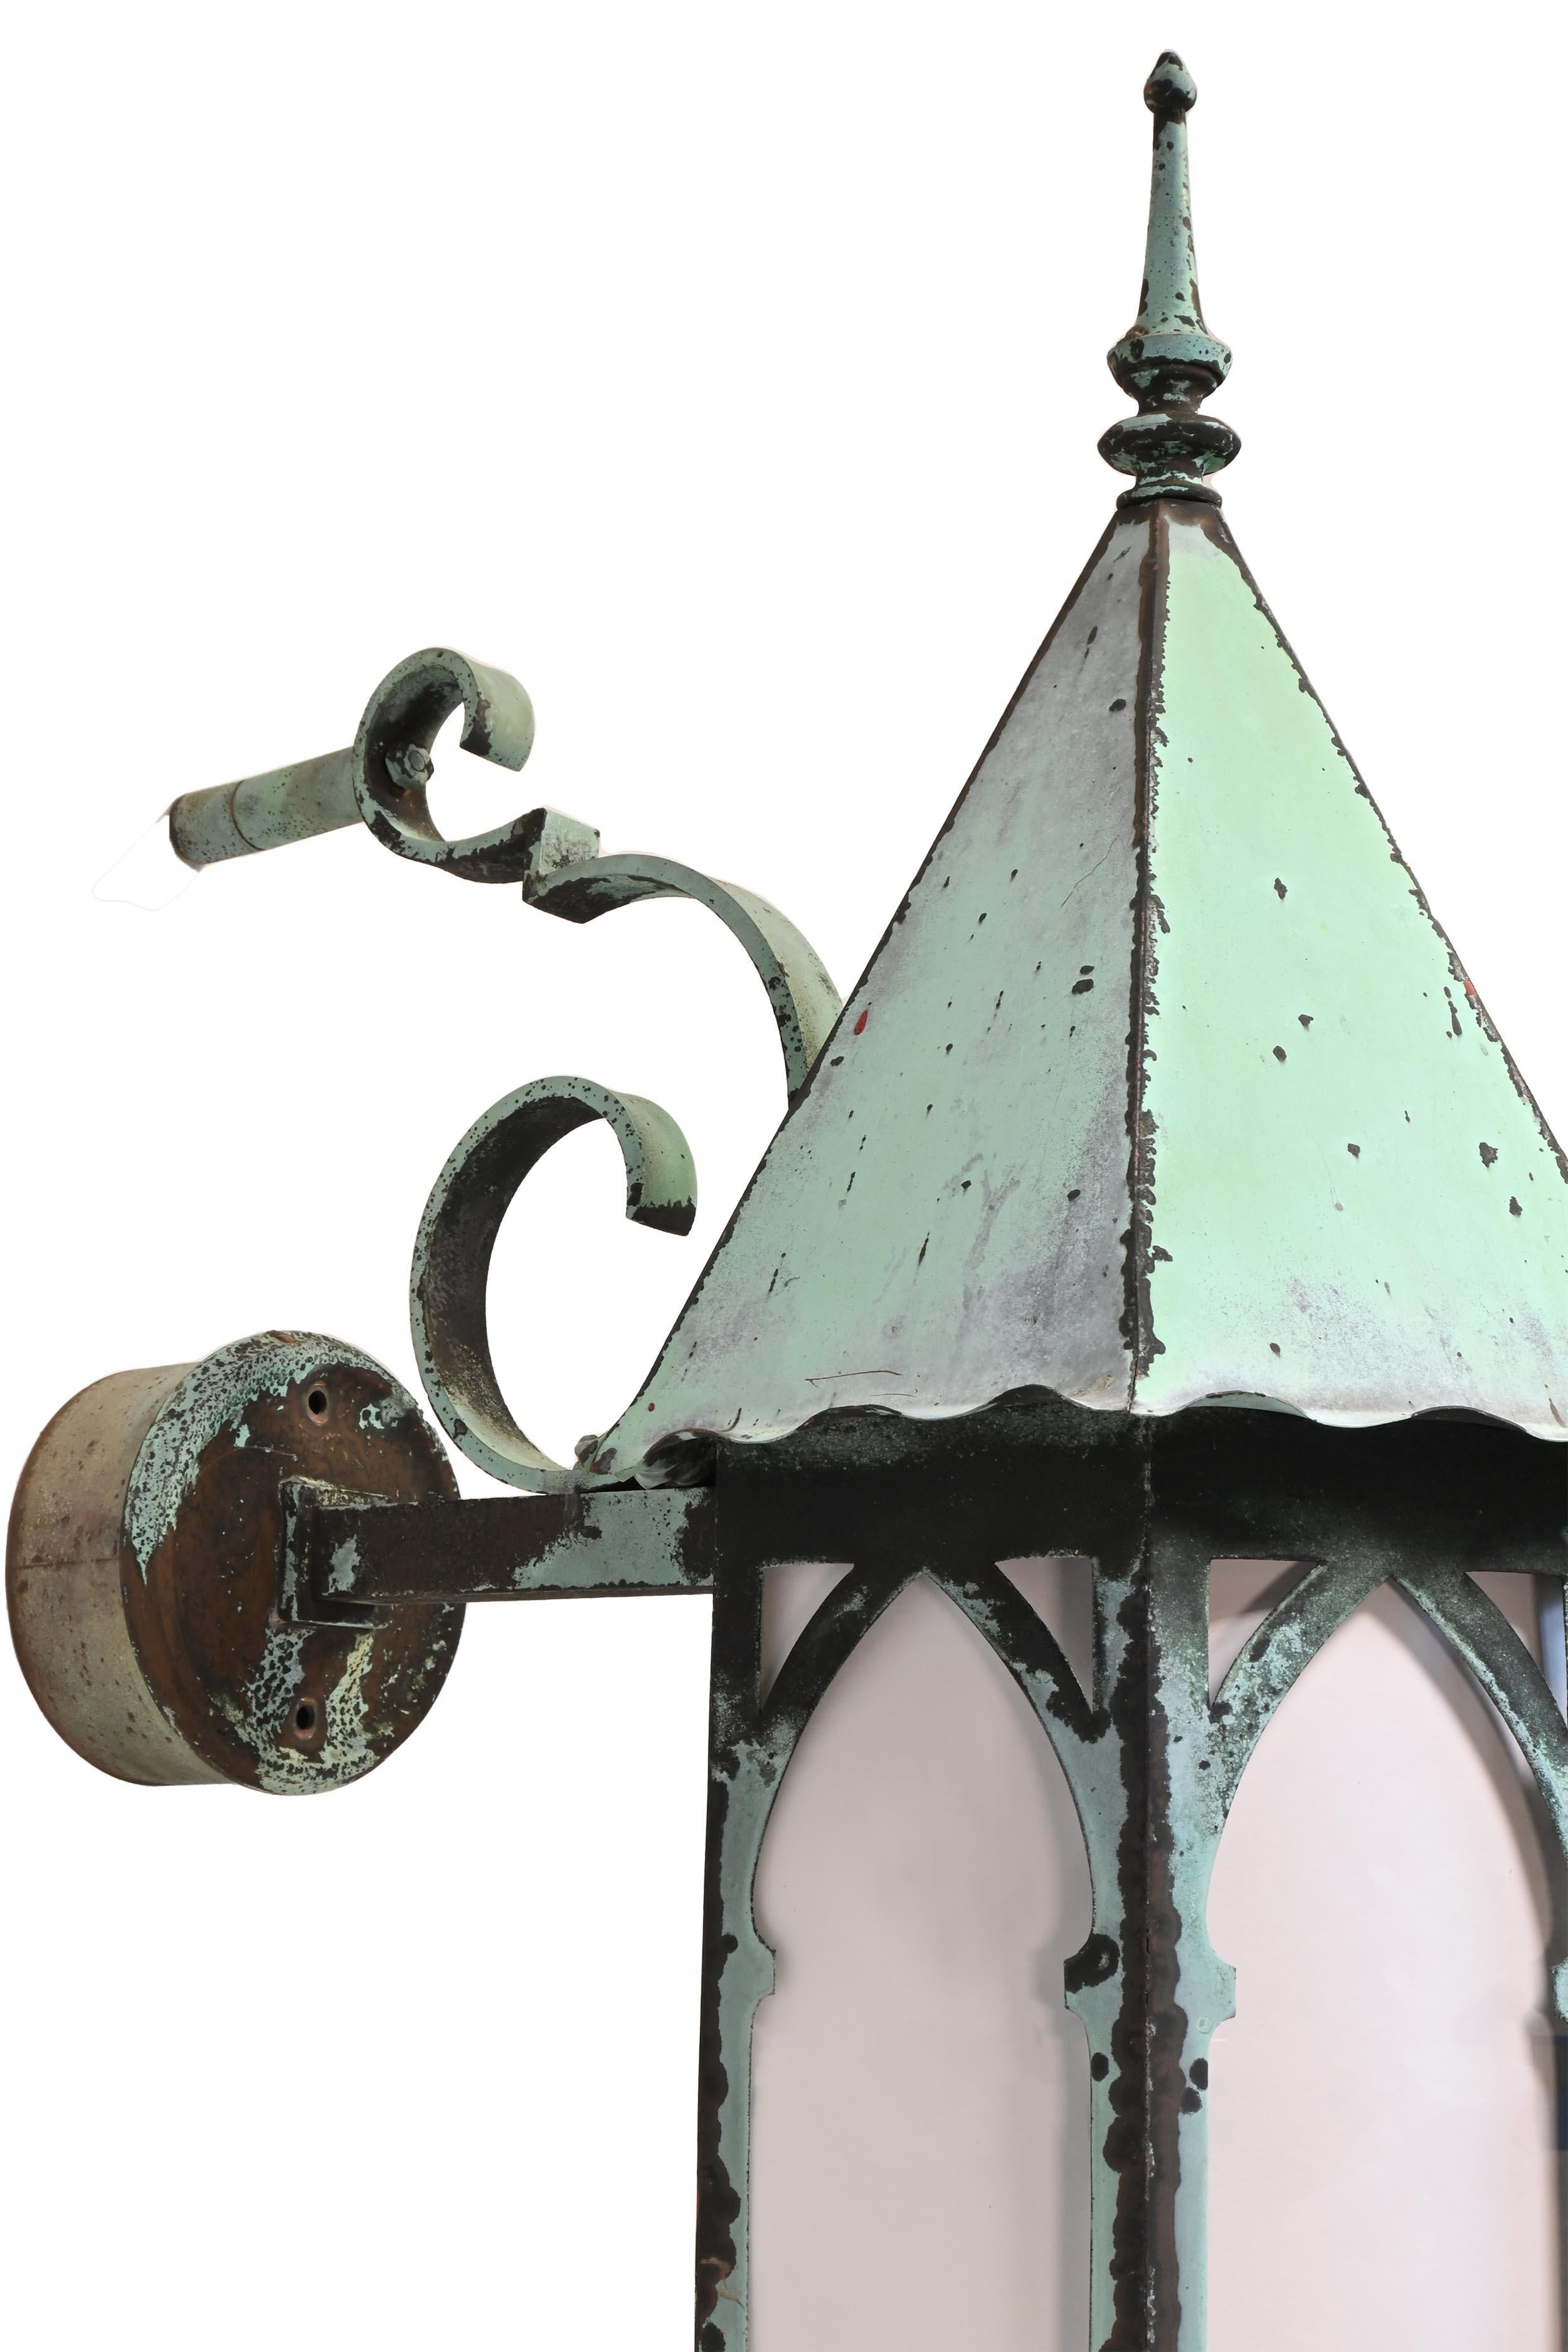 North American Tall Gothic Steeple Top Entrance Sconces Copper Verdigris Patina For Sale